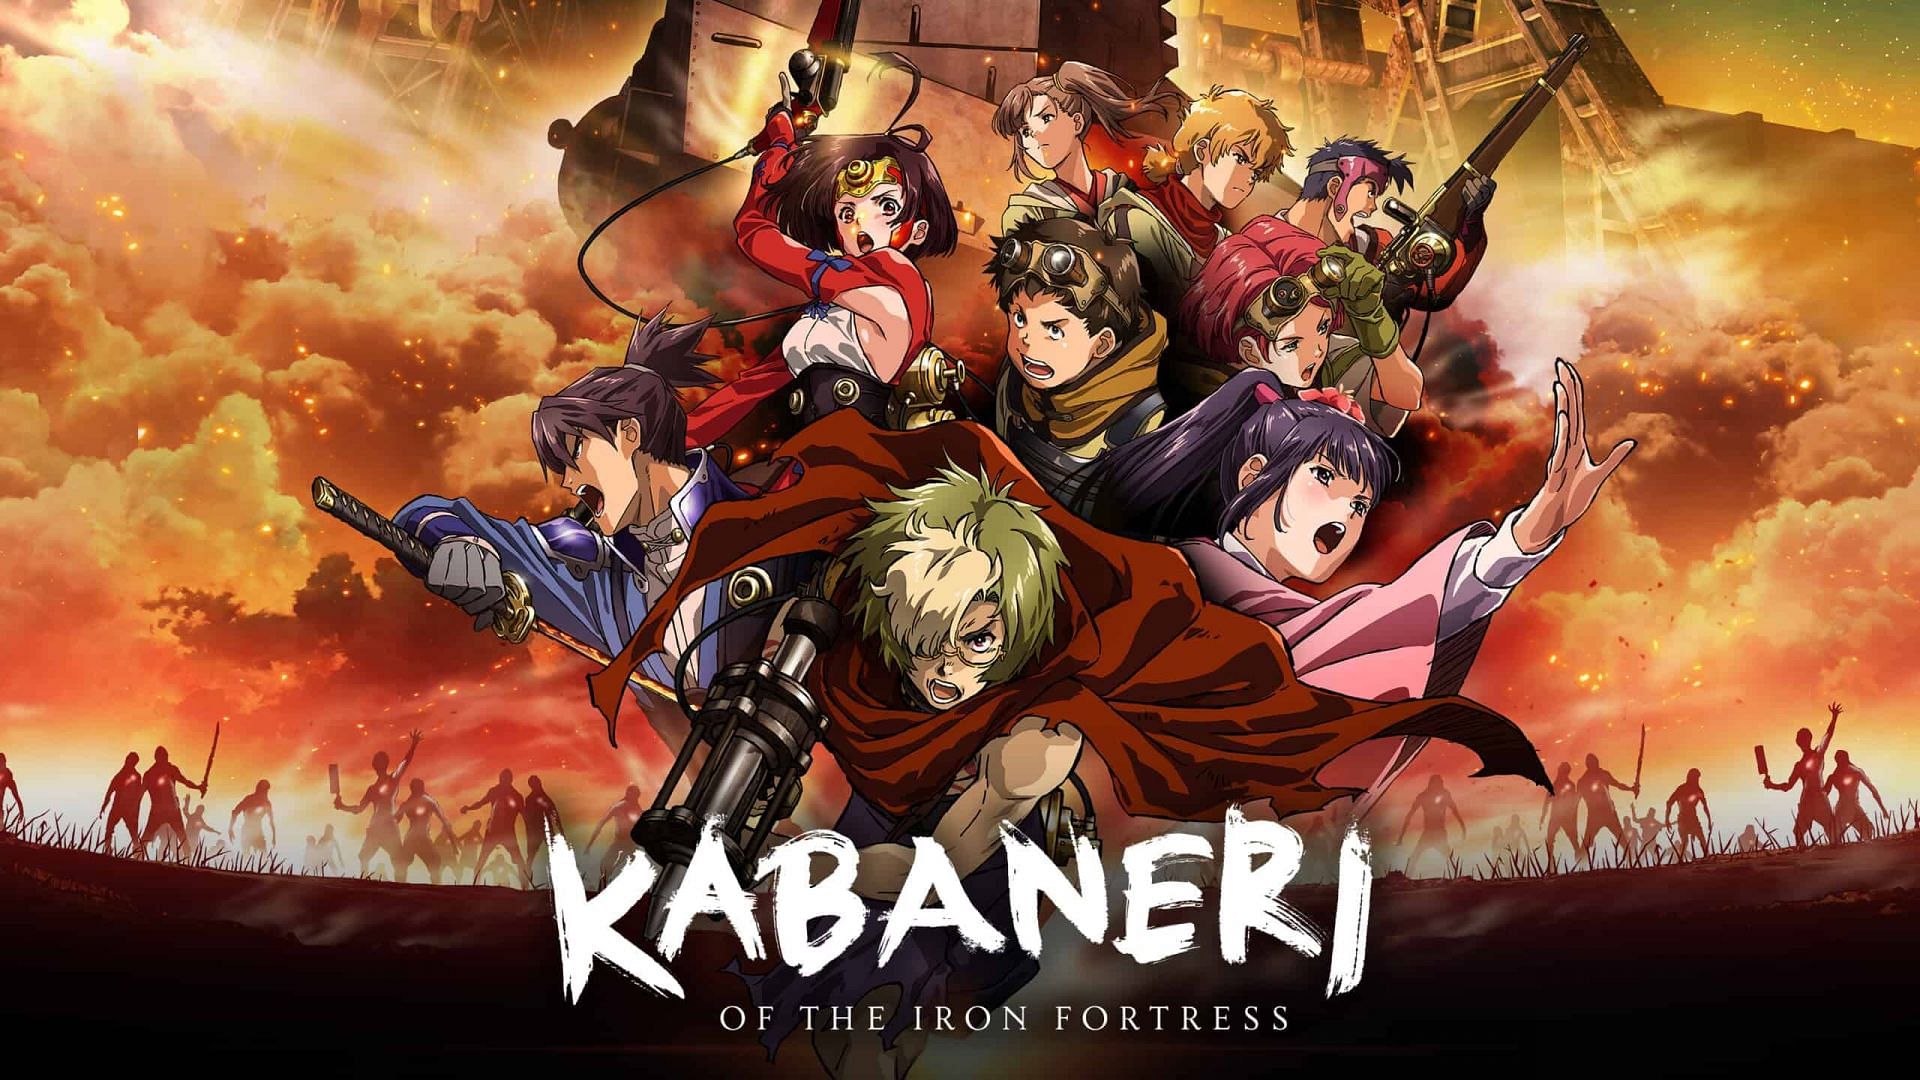 The official poster of Kabaneri of the Iron Fortress (Image via Wit Studio)